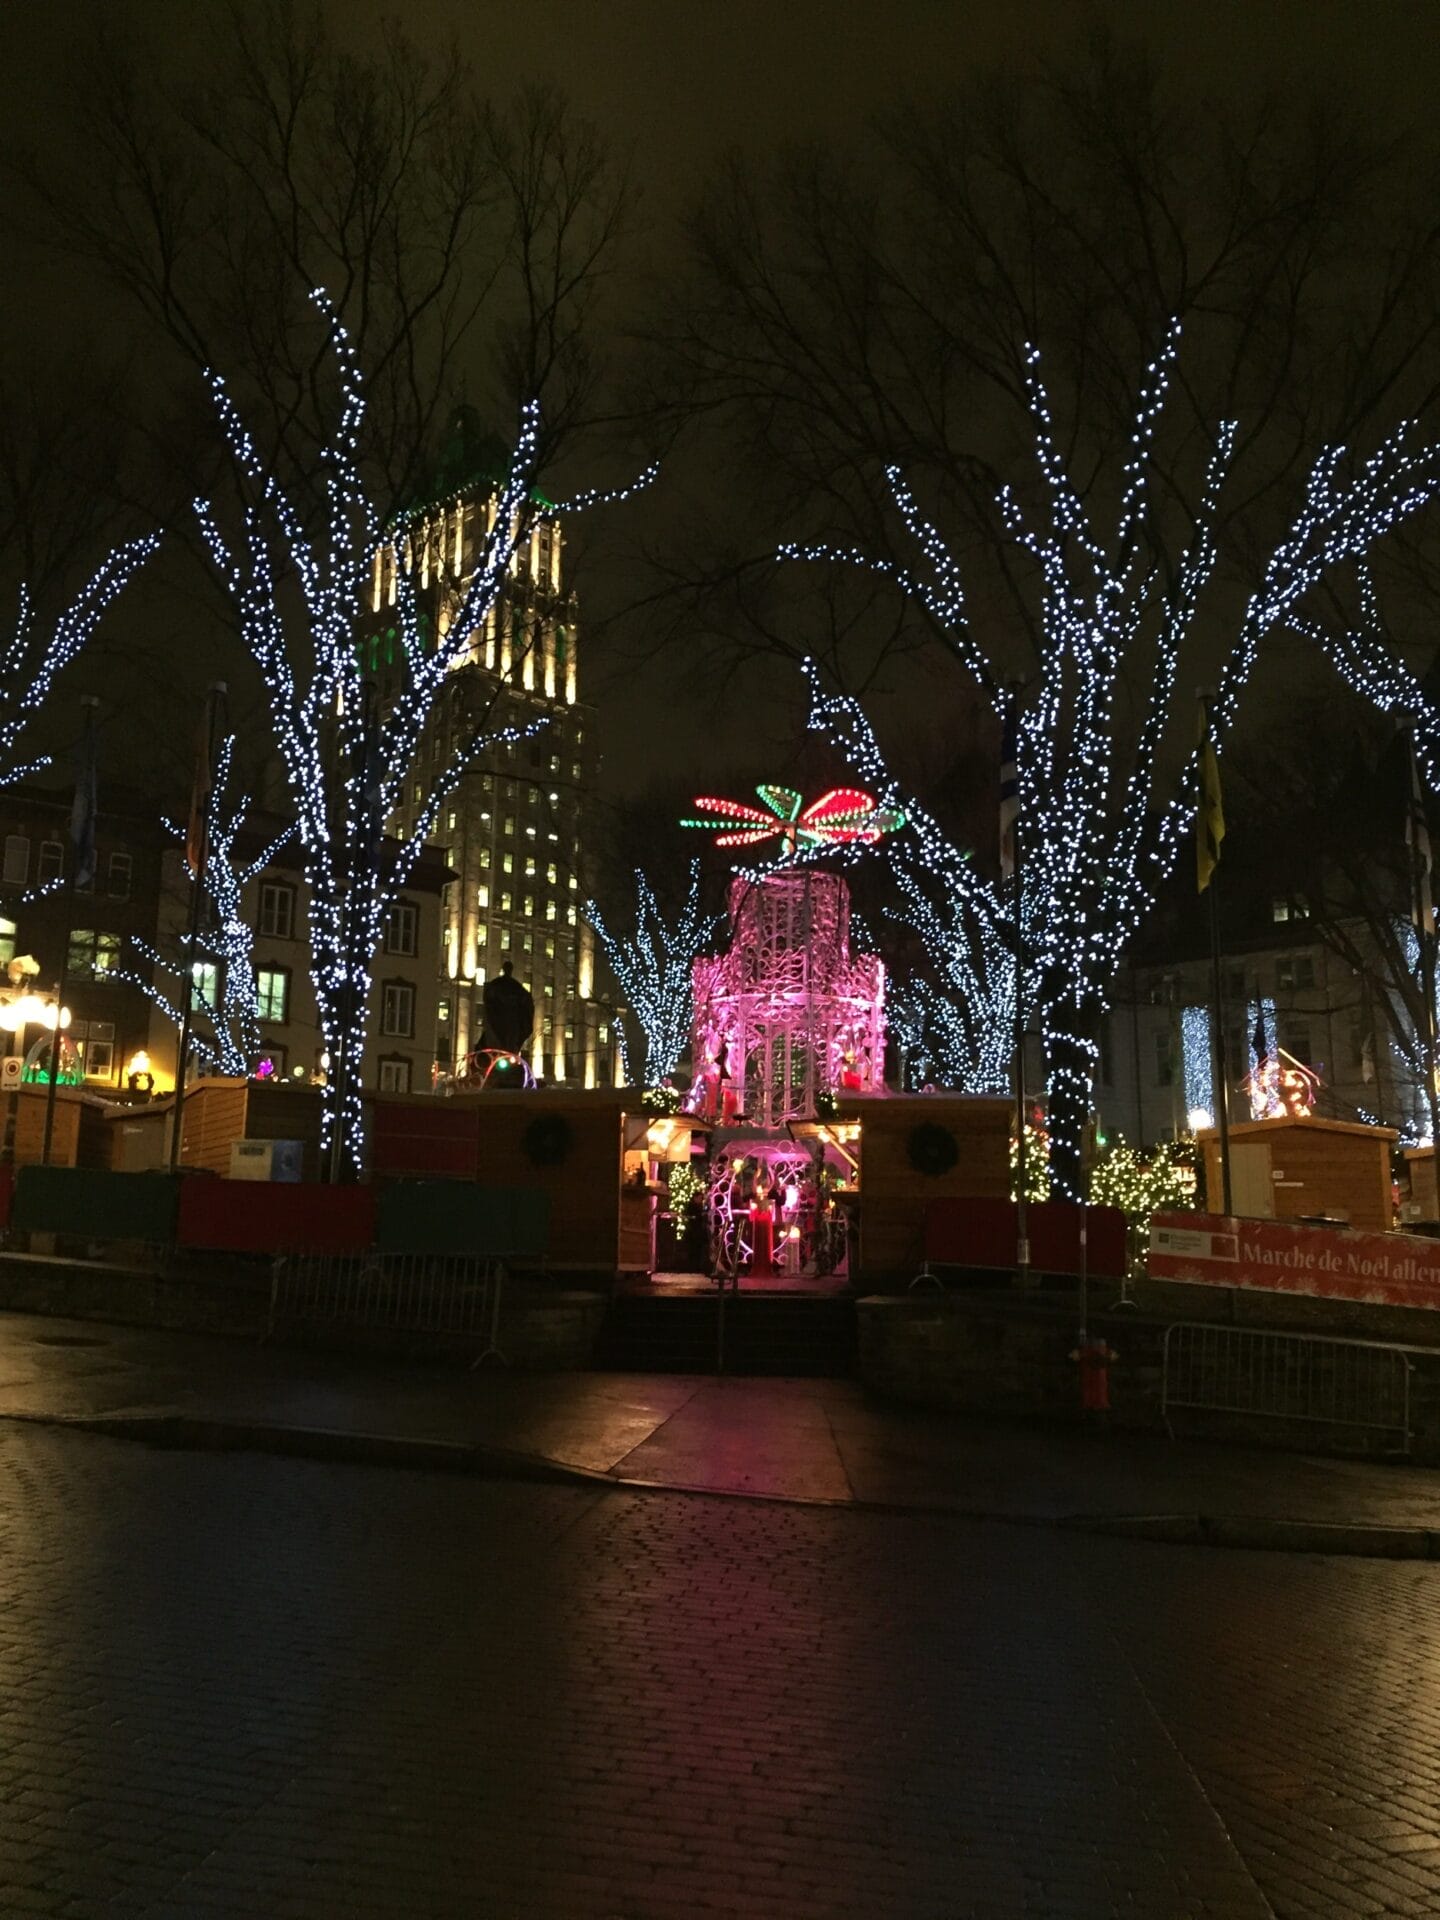 Quebec City German Christmas Market is resplendent with glittering lights, mulled wine and wood-burning fireplaces.